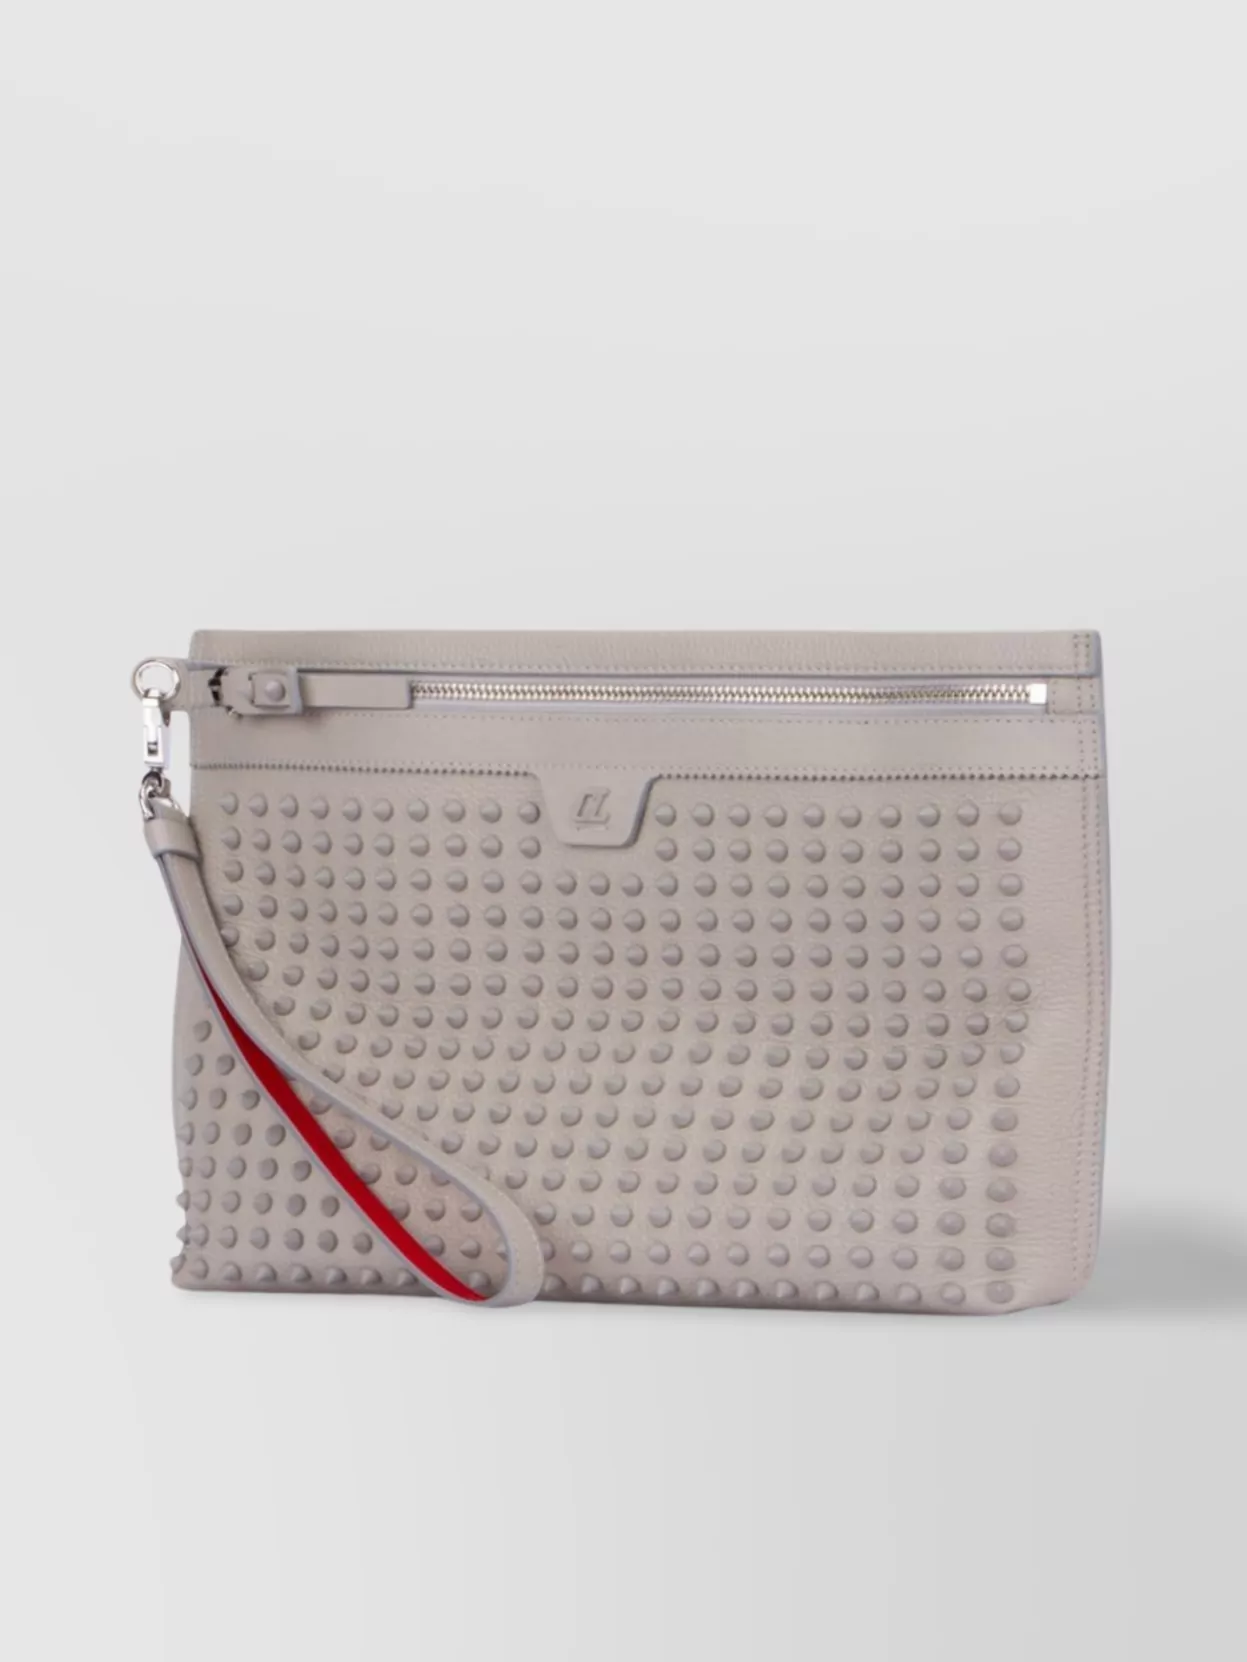 Christian Louboutin Textured Finish Clutch Bag With Detachable Wrist Strap